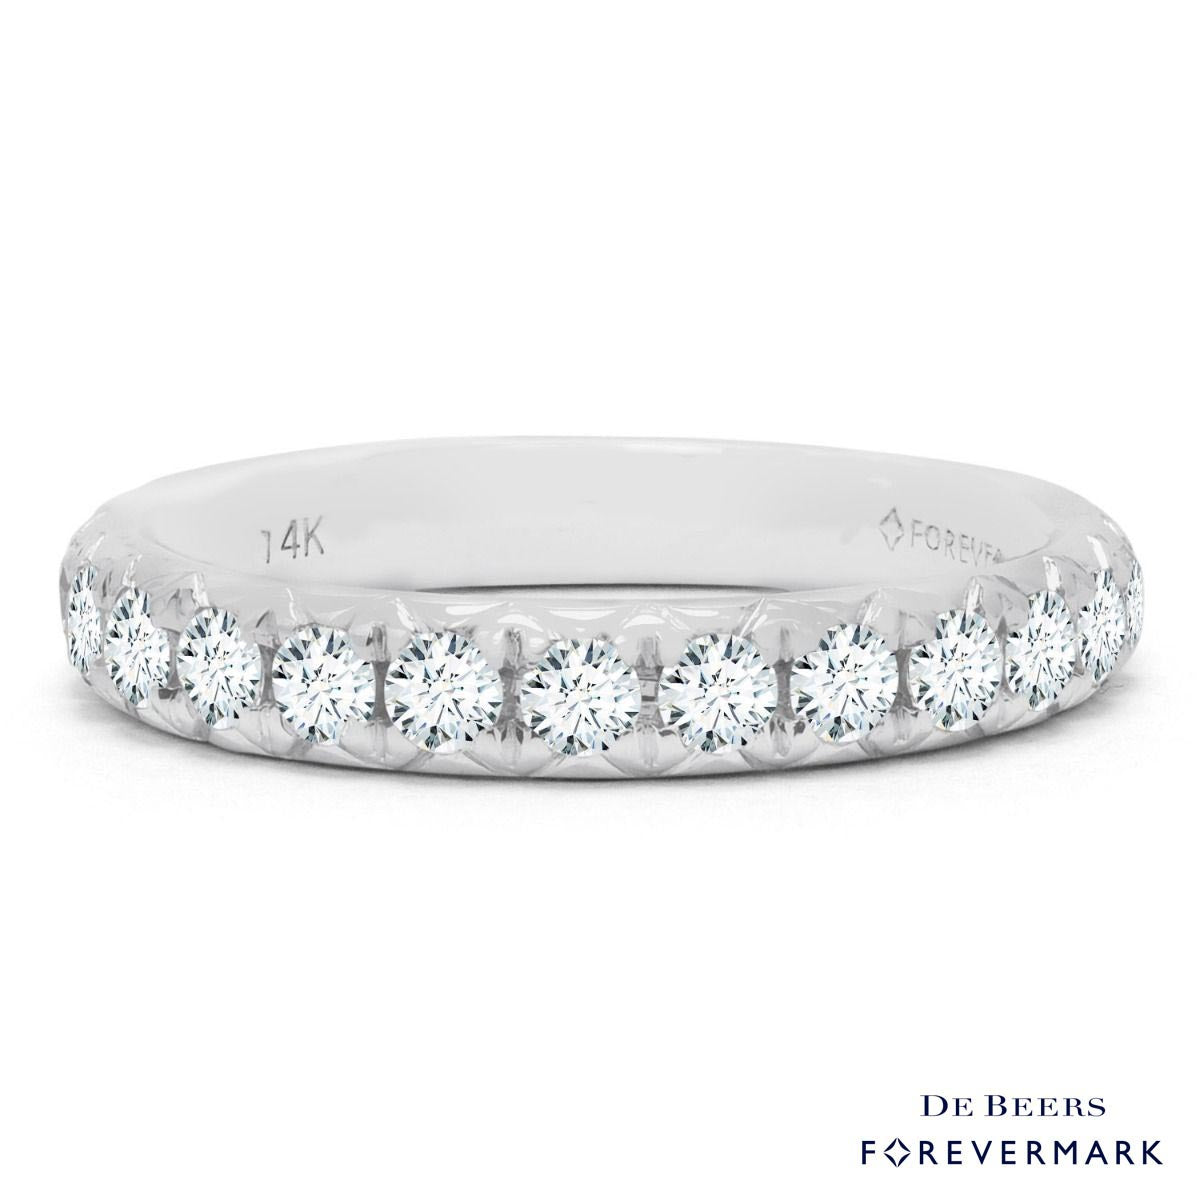 De Beers Forevermark Petite Diamond Pave Wedding Band in 14kt White Gold (3/4ct tw)